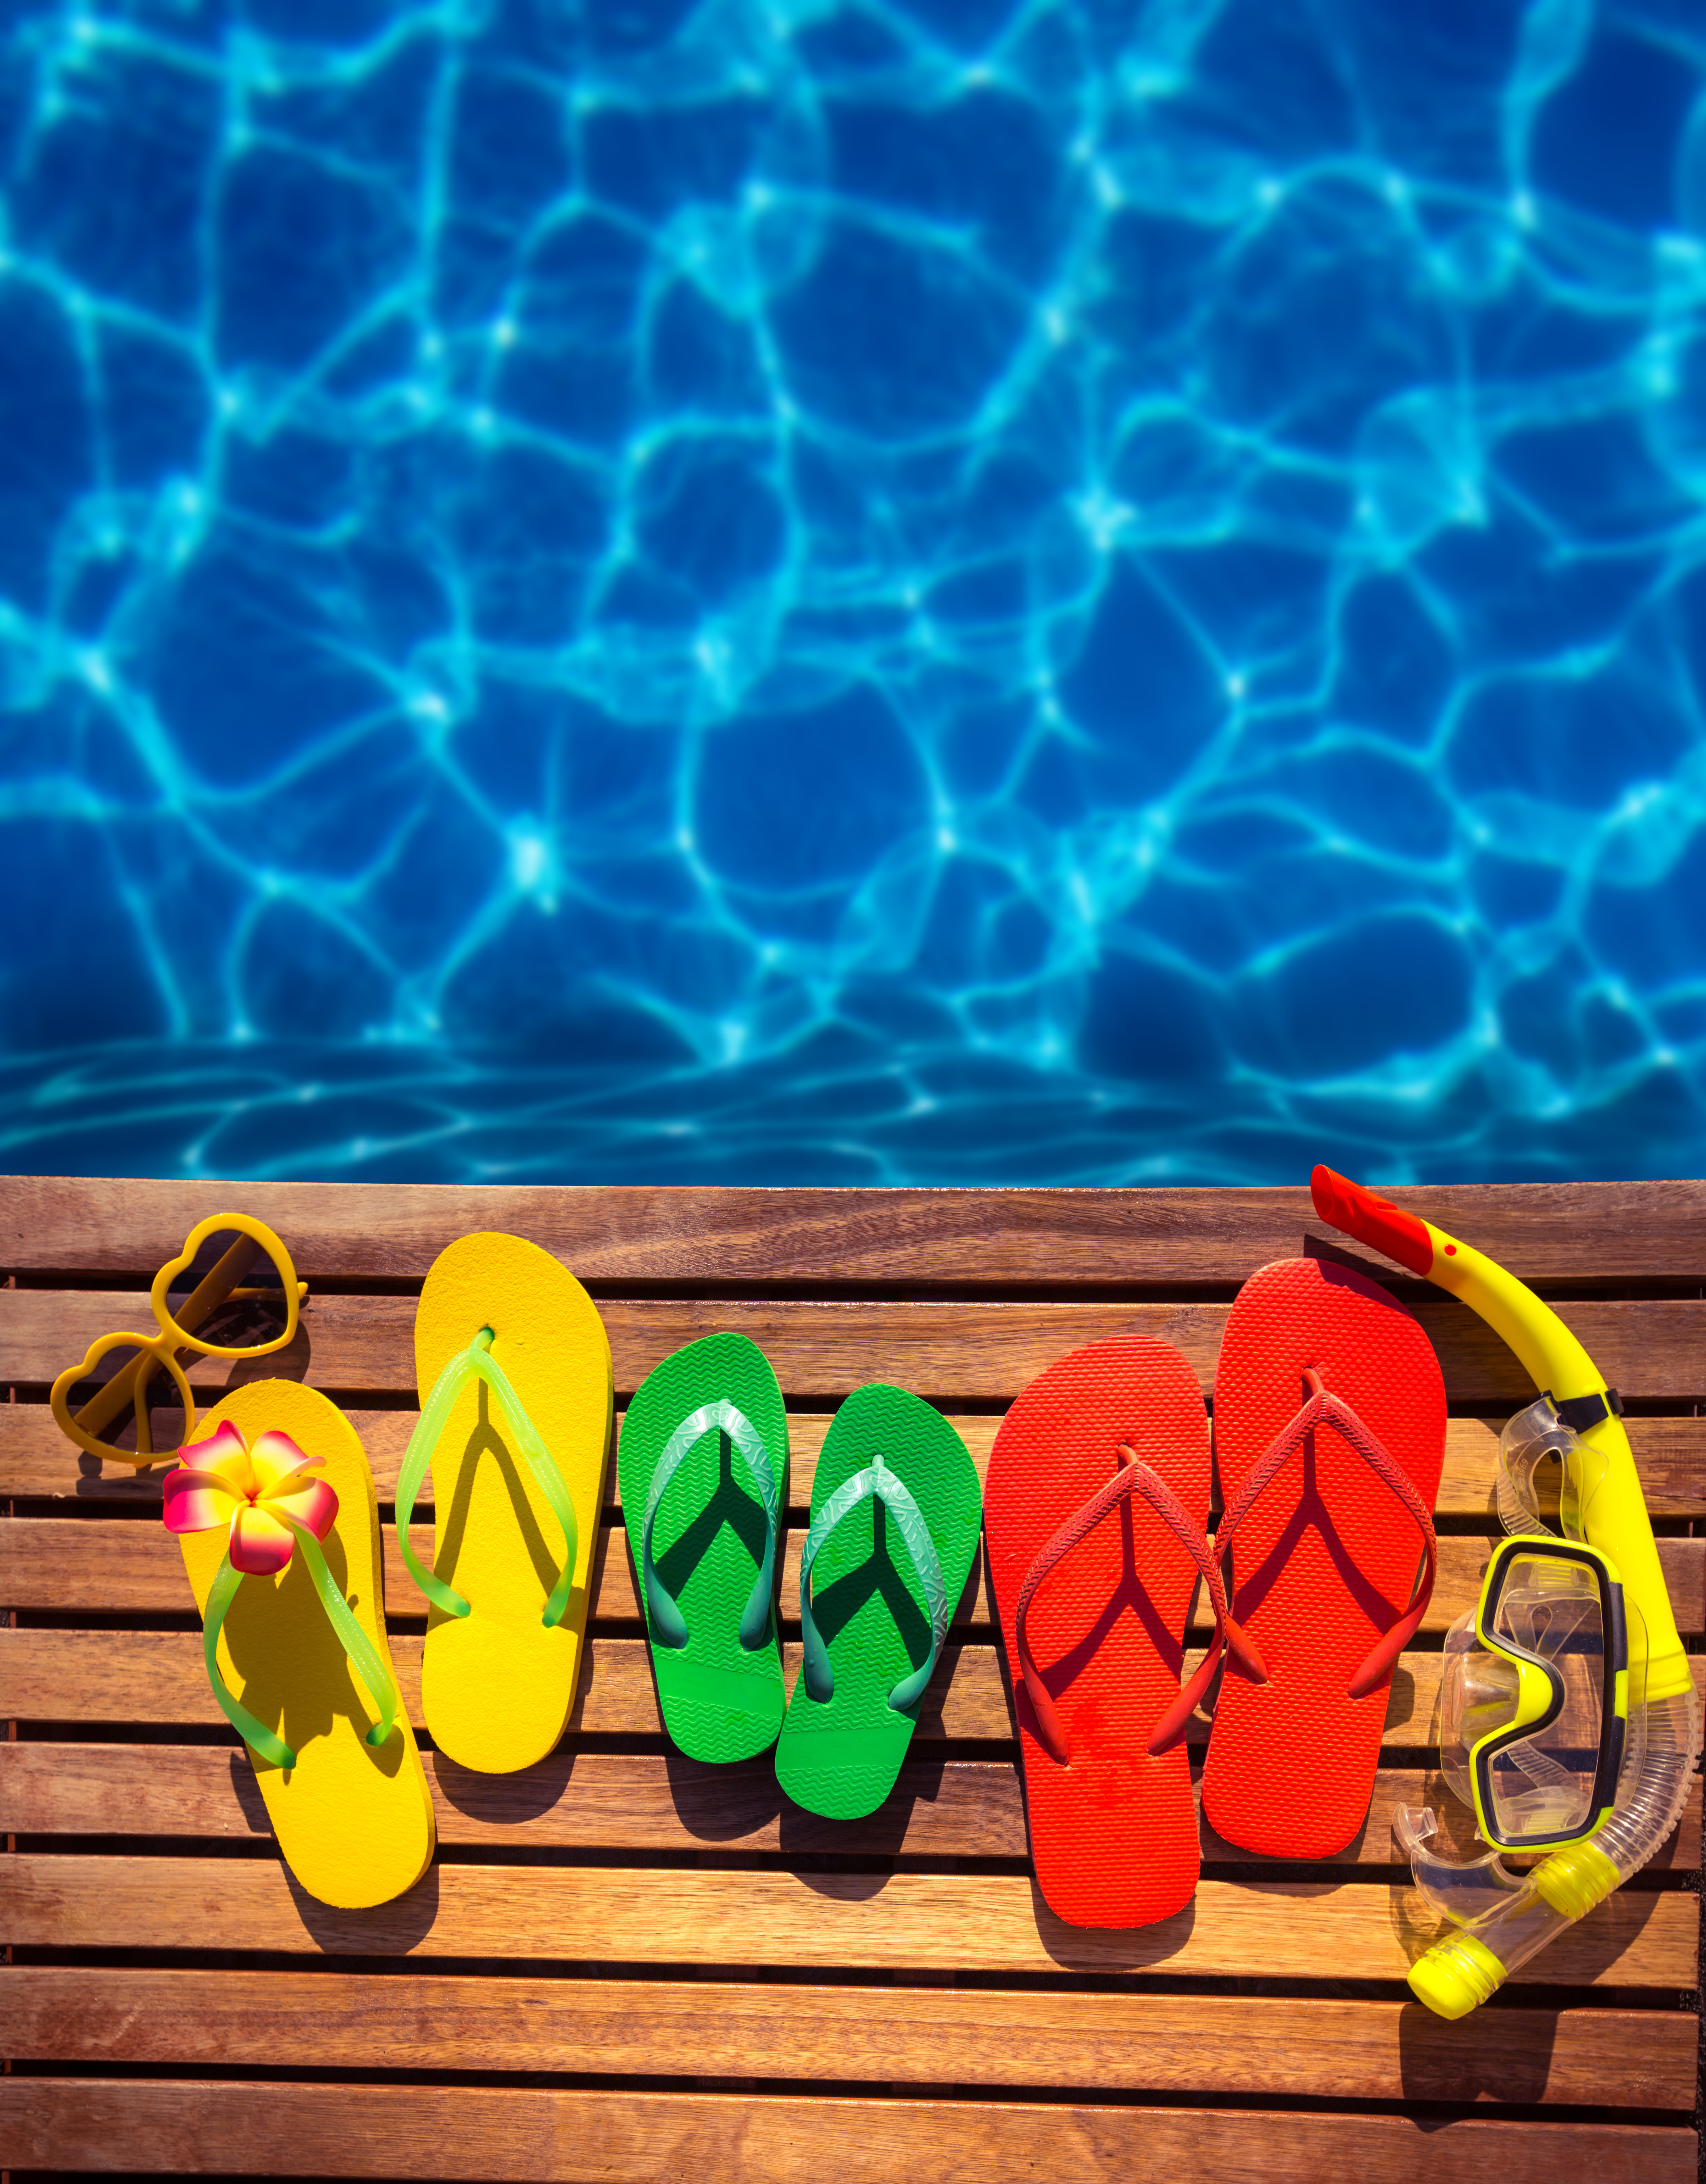 Ease into summer vacation from school mode so you can relax by the pool.